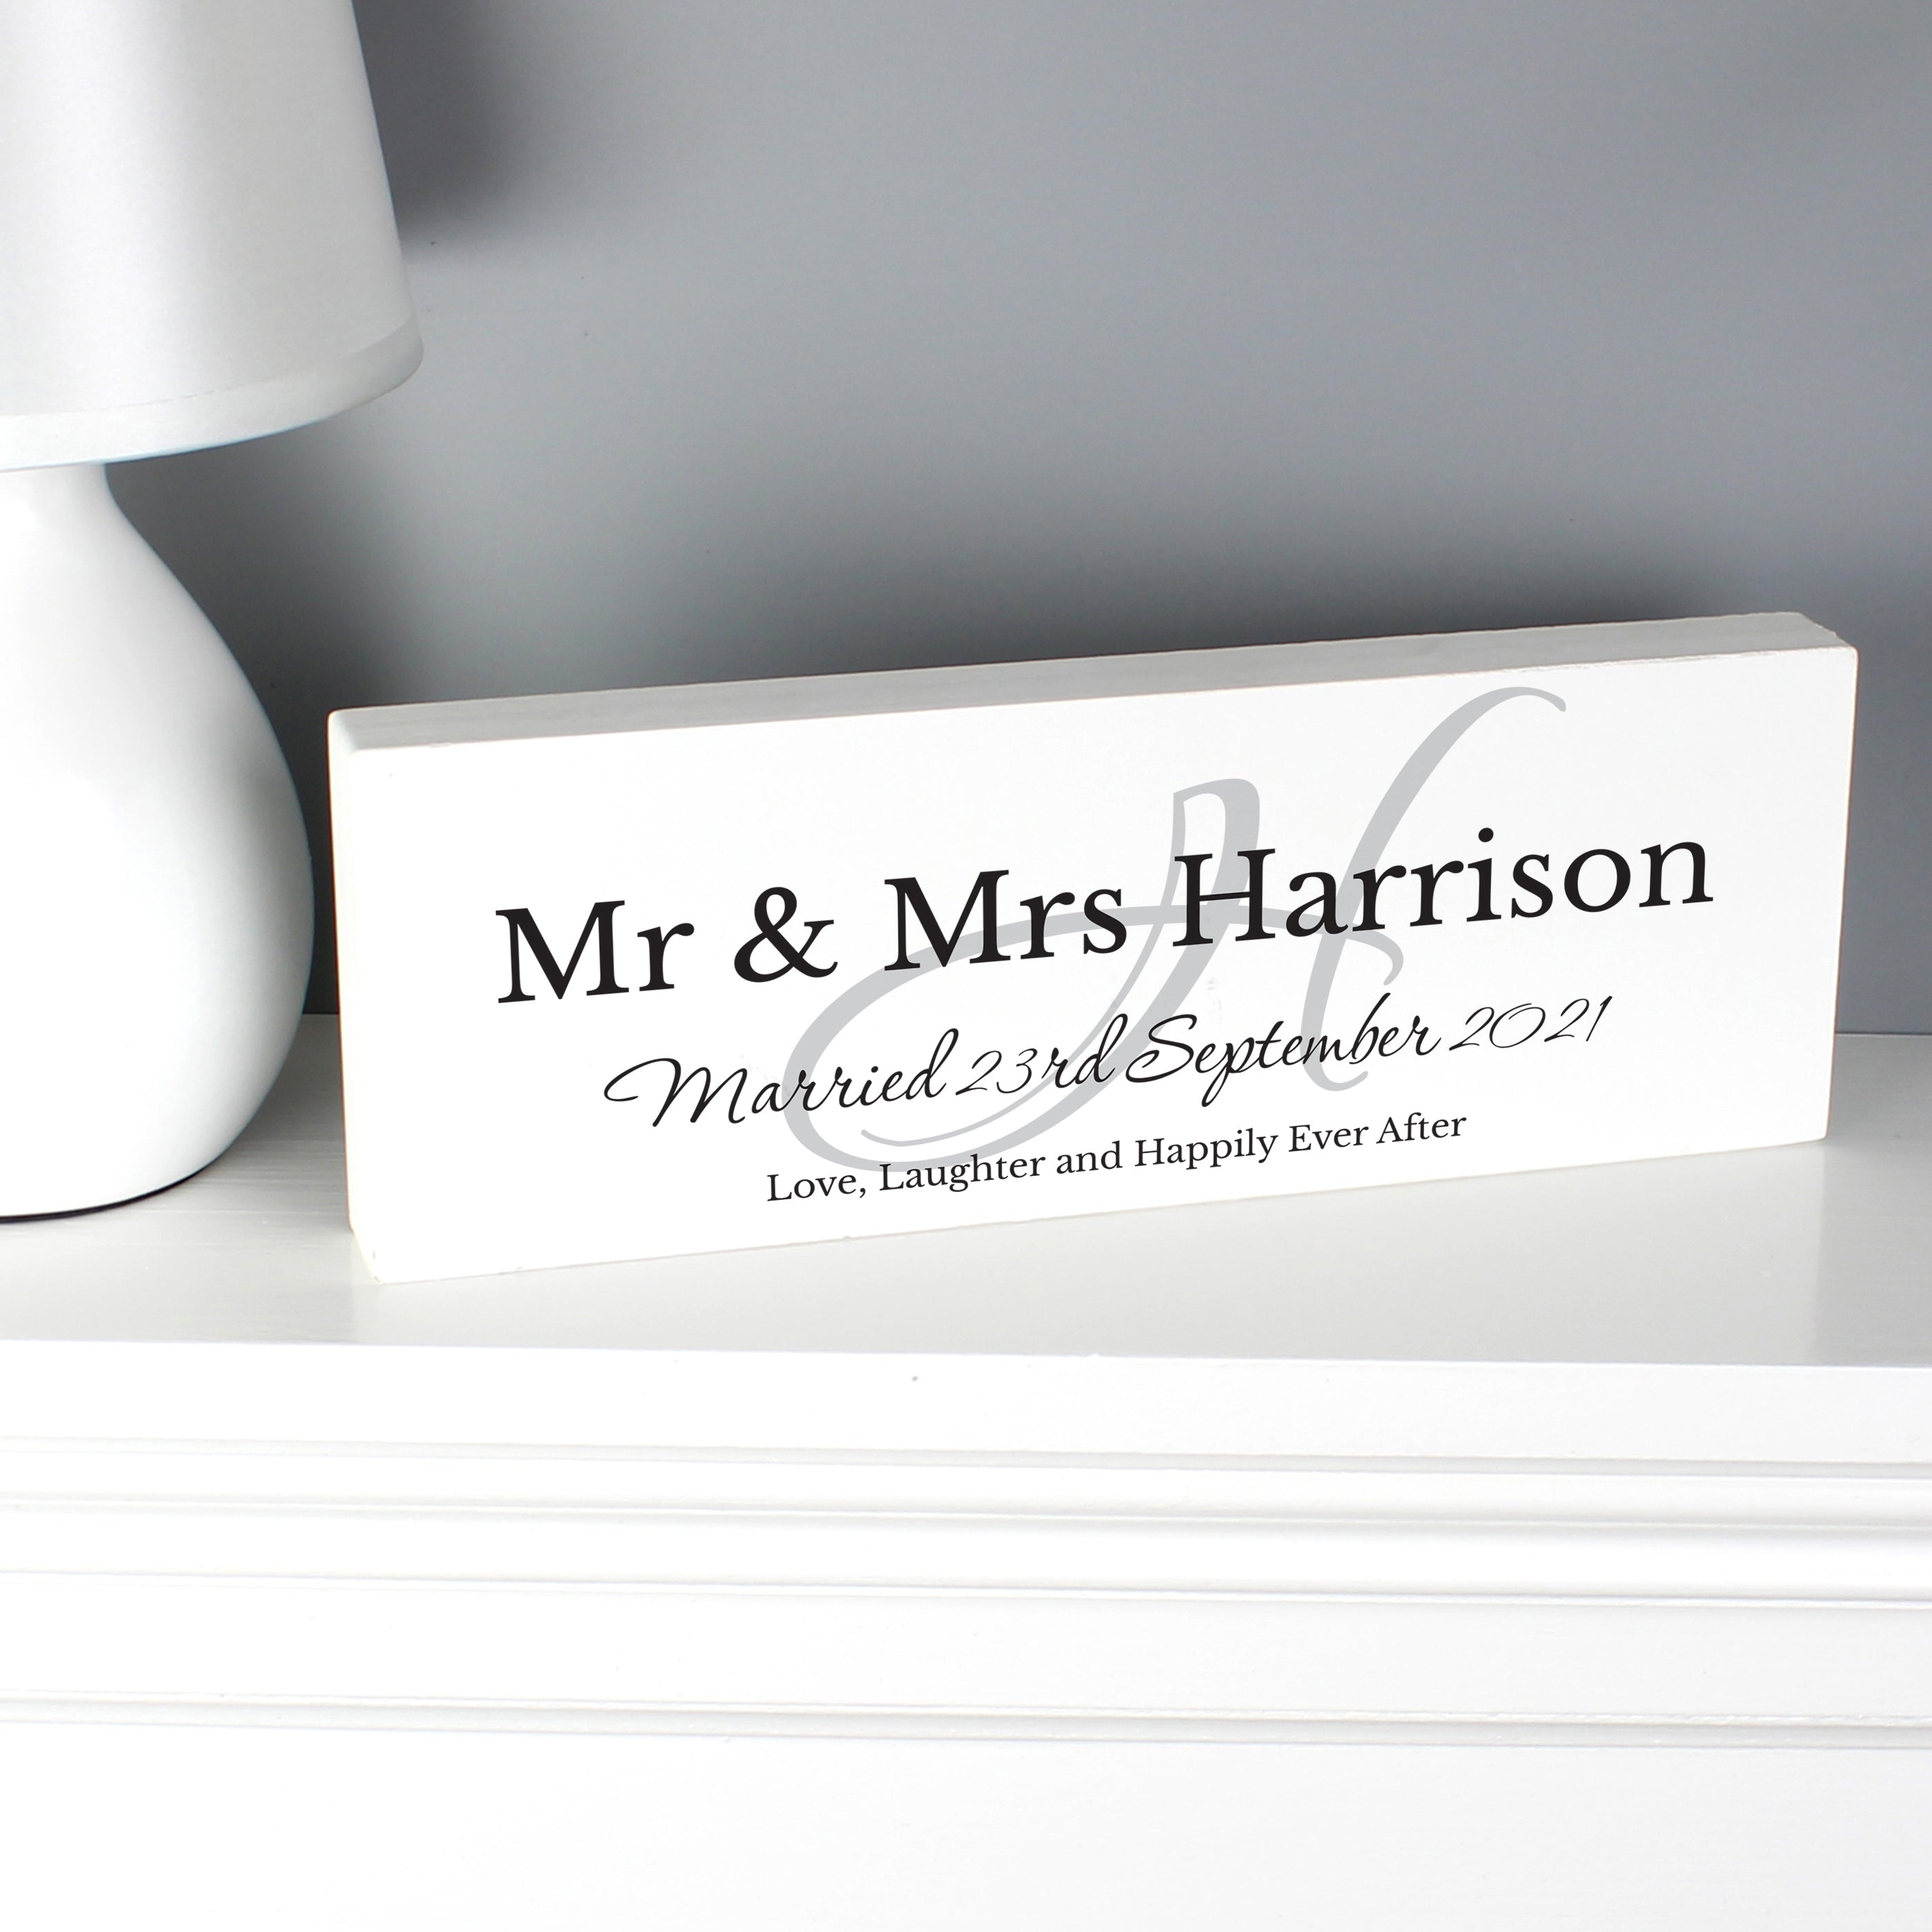 Personalised Family Wooden Block Sign On The Side Next To A Lamp